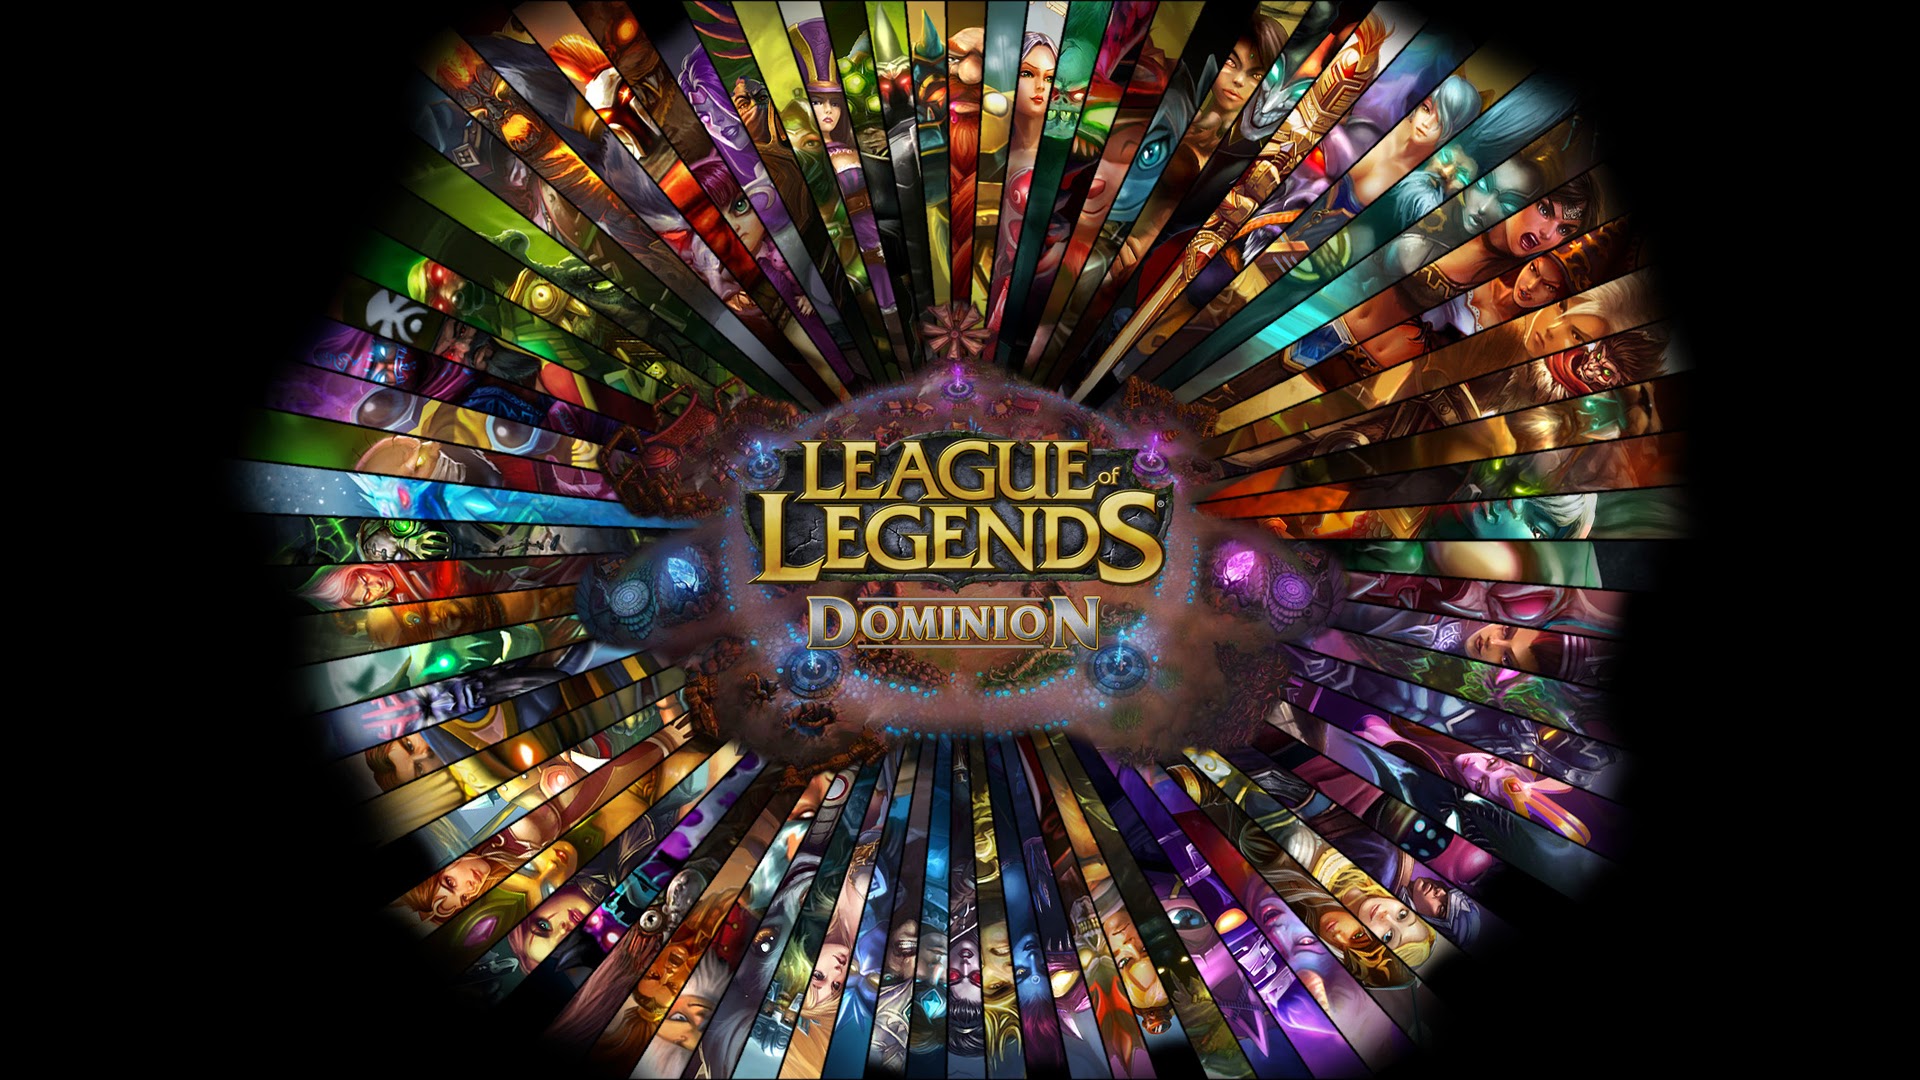 league of legends wallpaper hd 1920x1080,stained glass,symmetry,psychedelic art,graphic design,glass